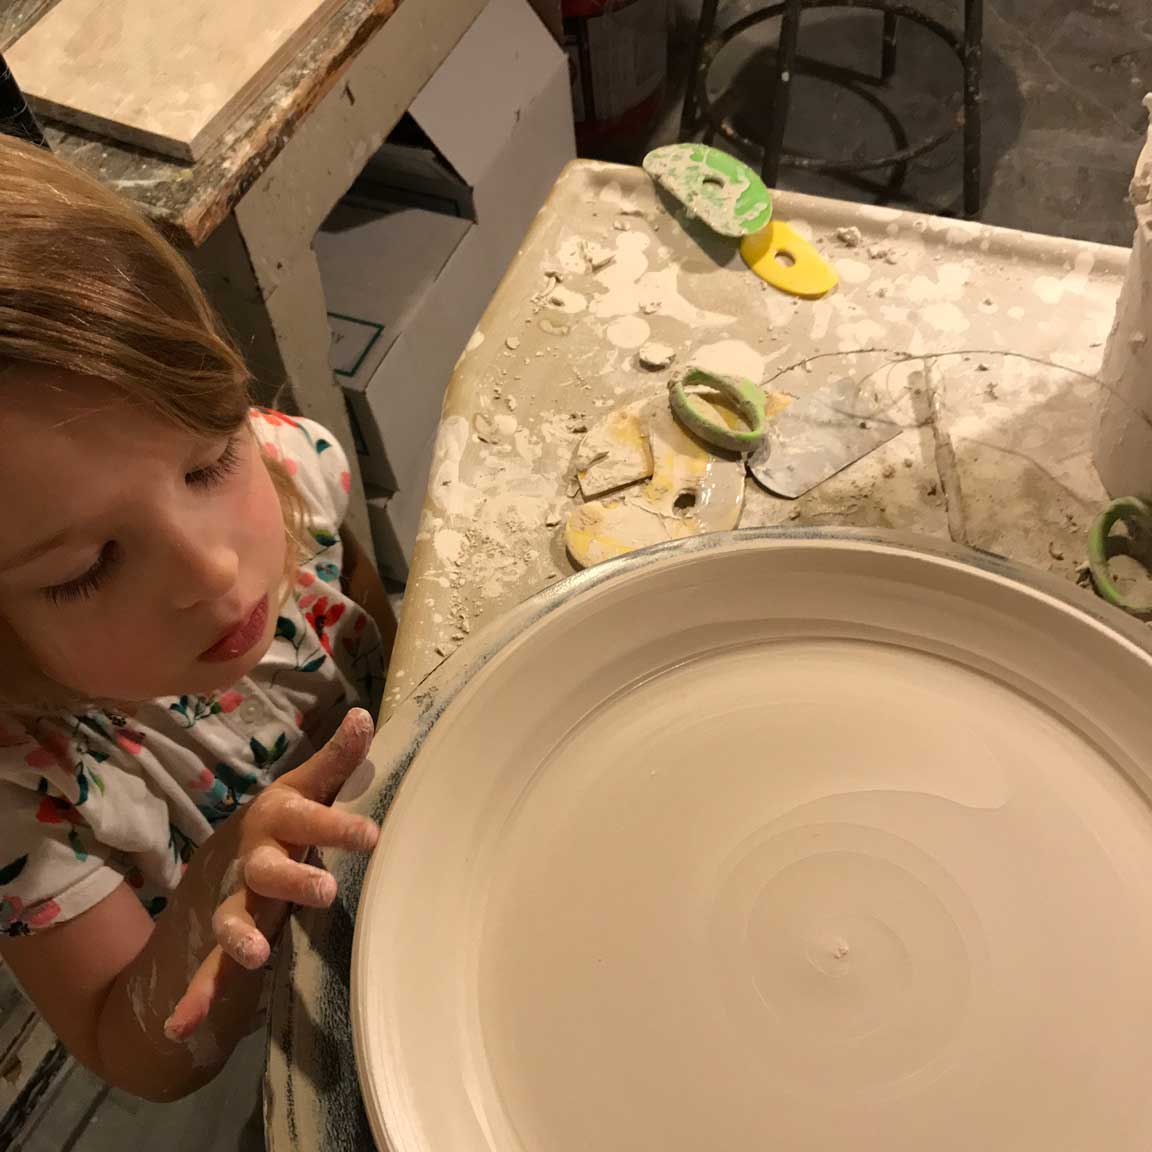 Kate Fisher's daughter inspects a freshly-thrown plate (by Kate).